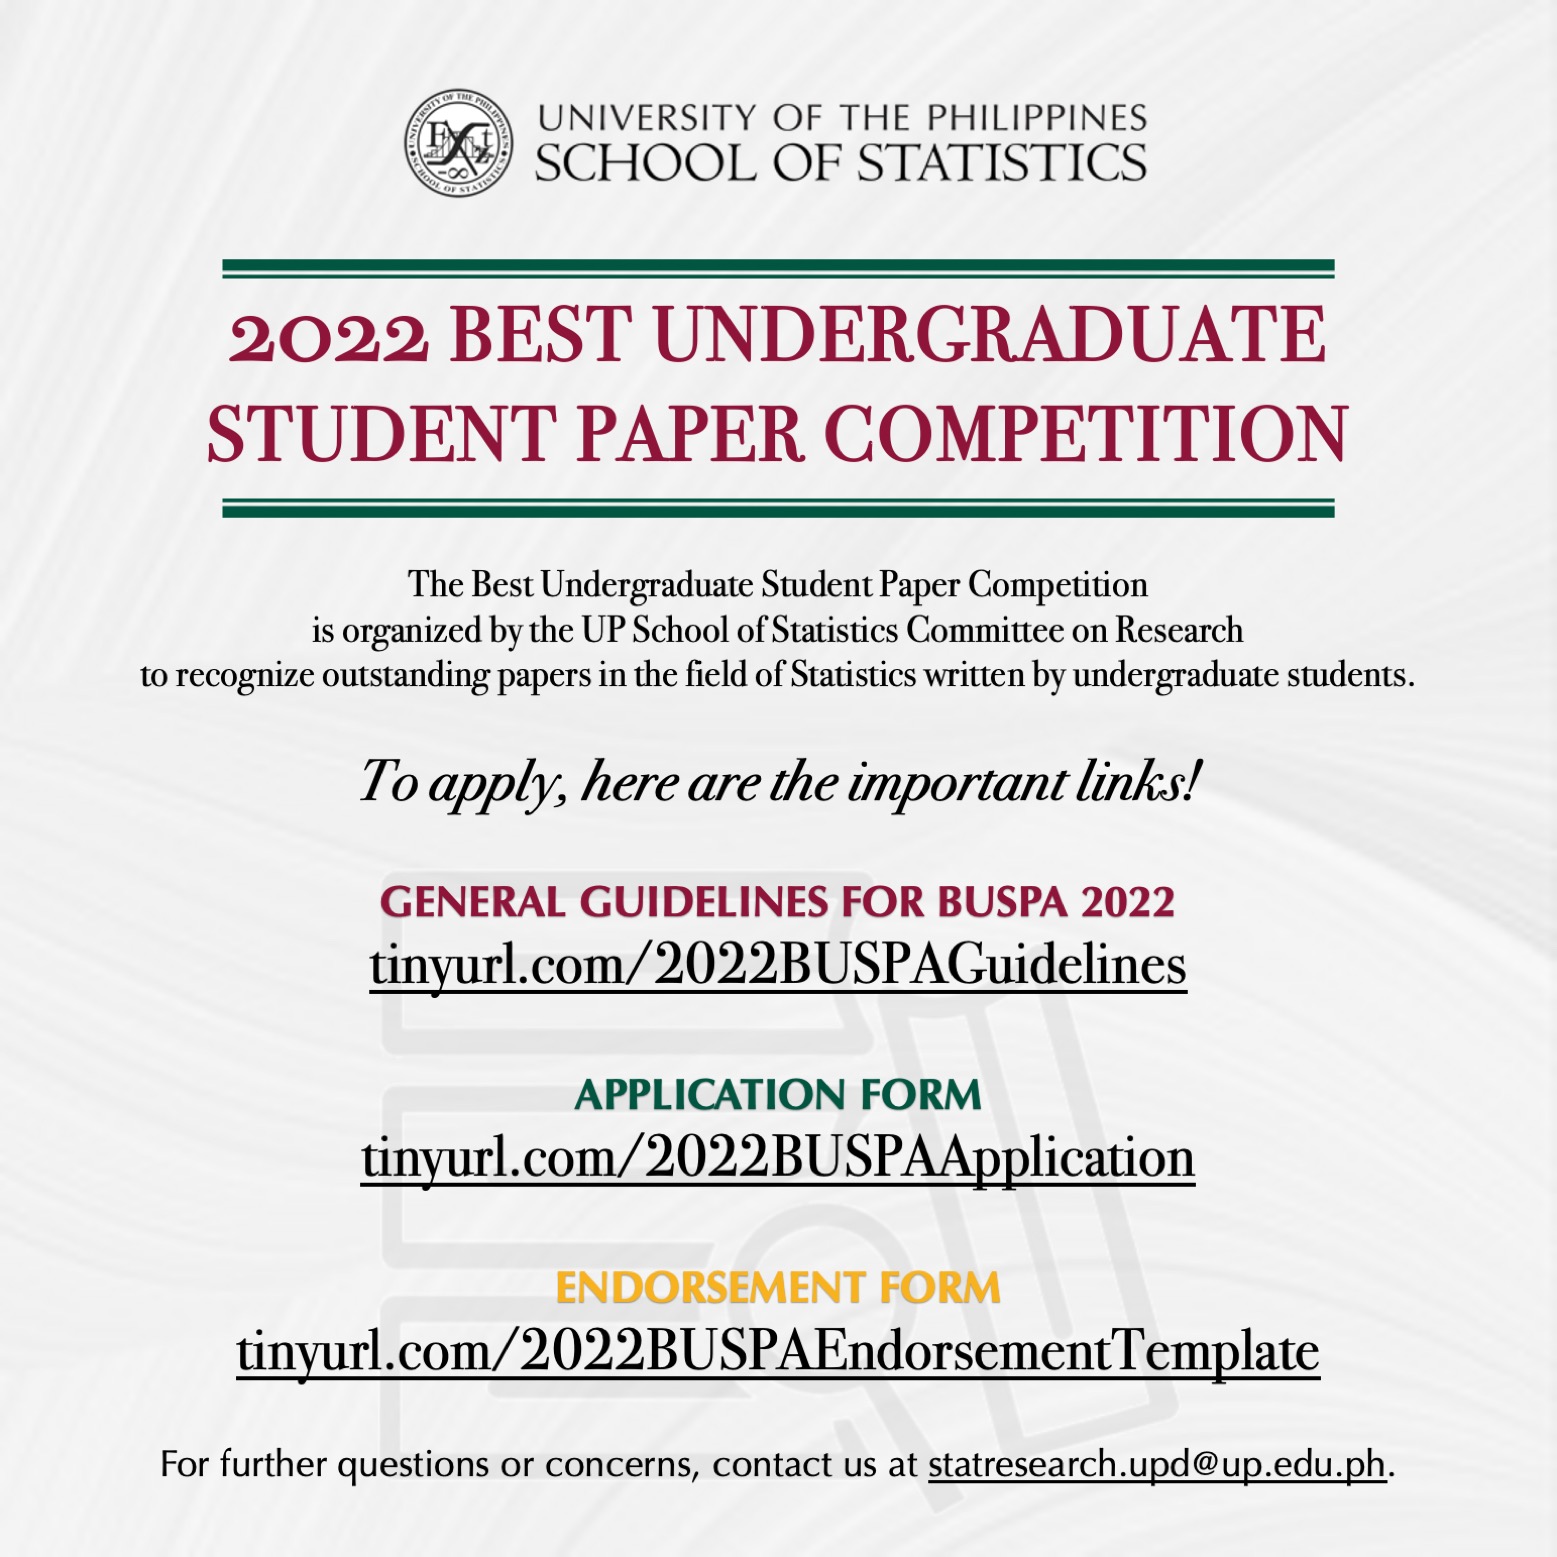 Image for 2022 Best Undergraduate Student Paper Competition